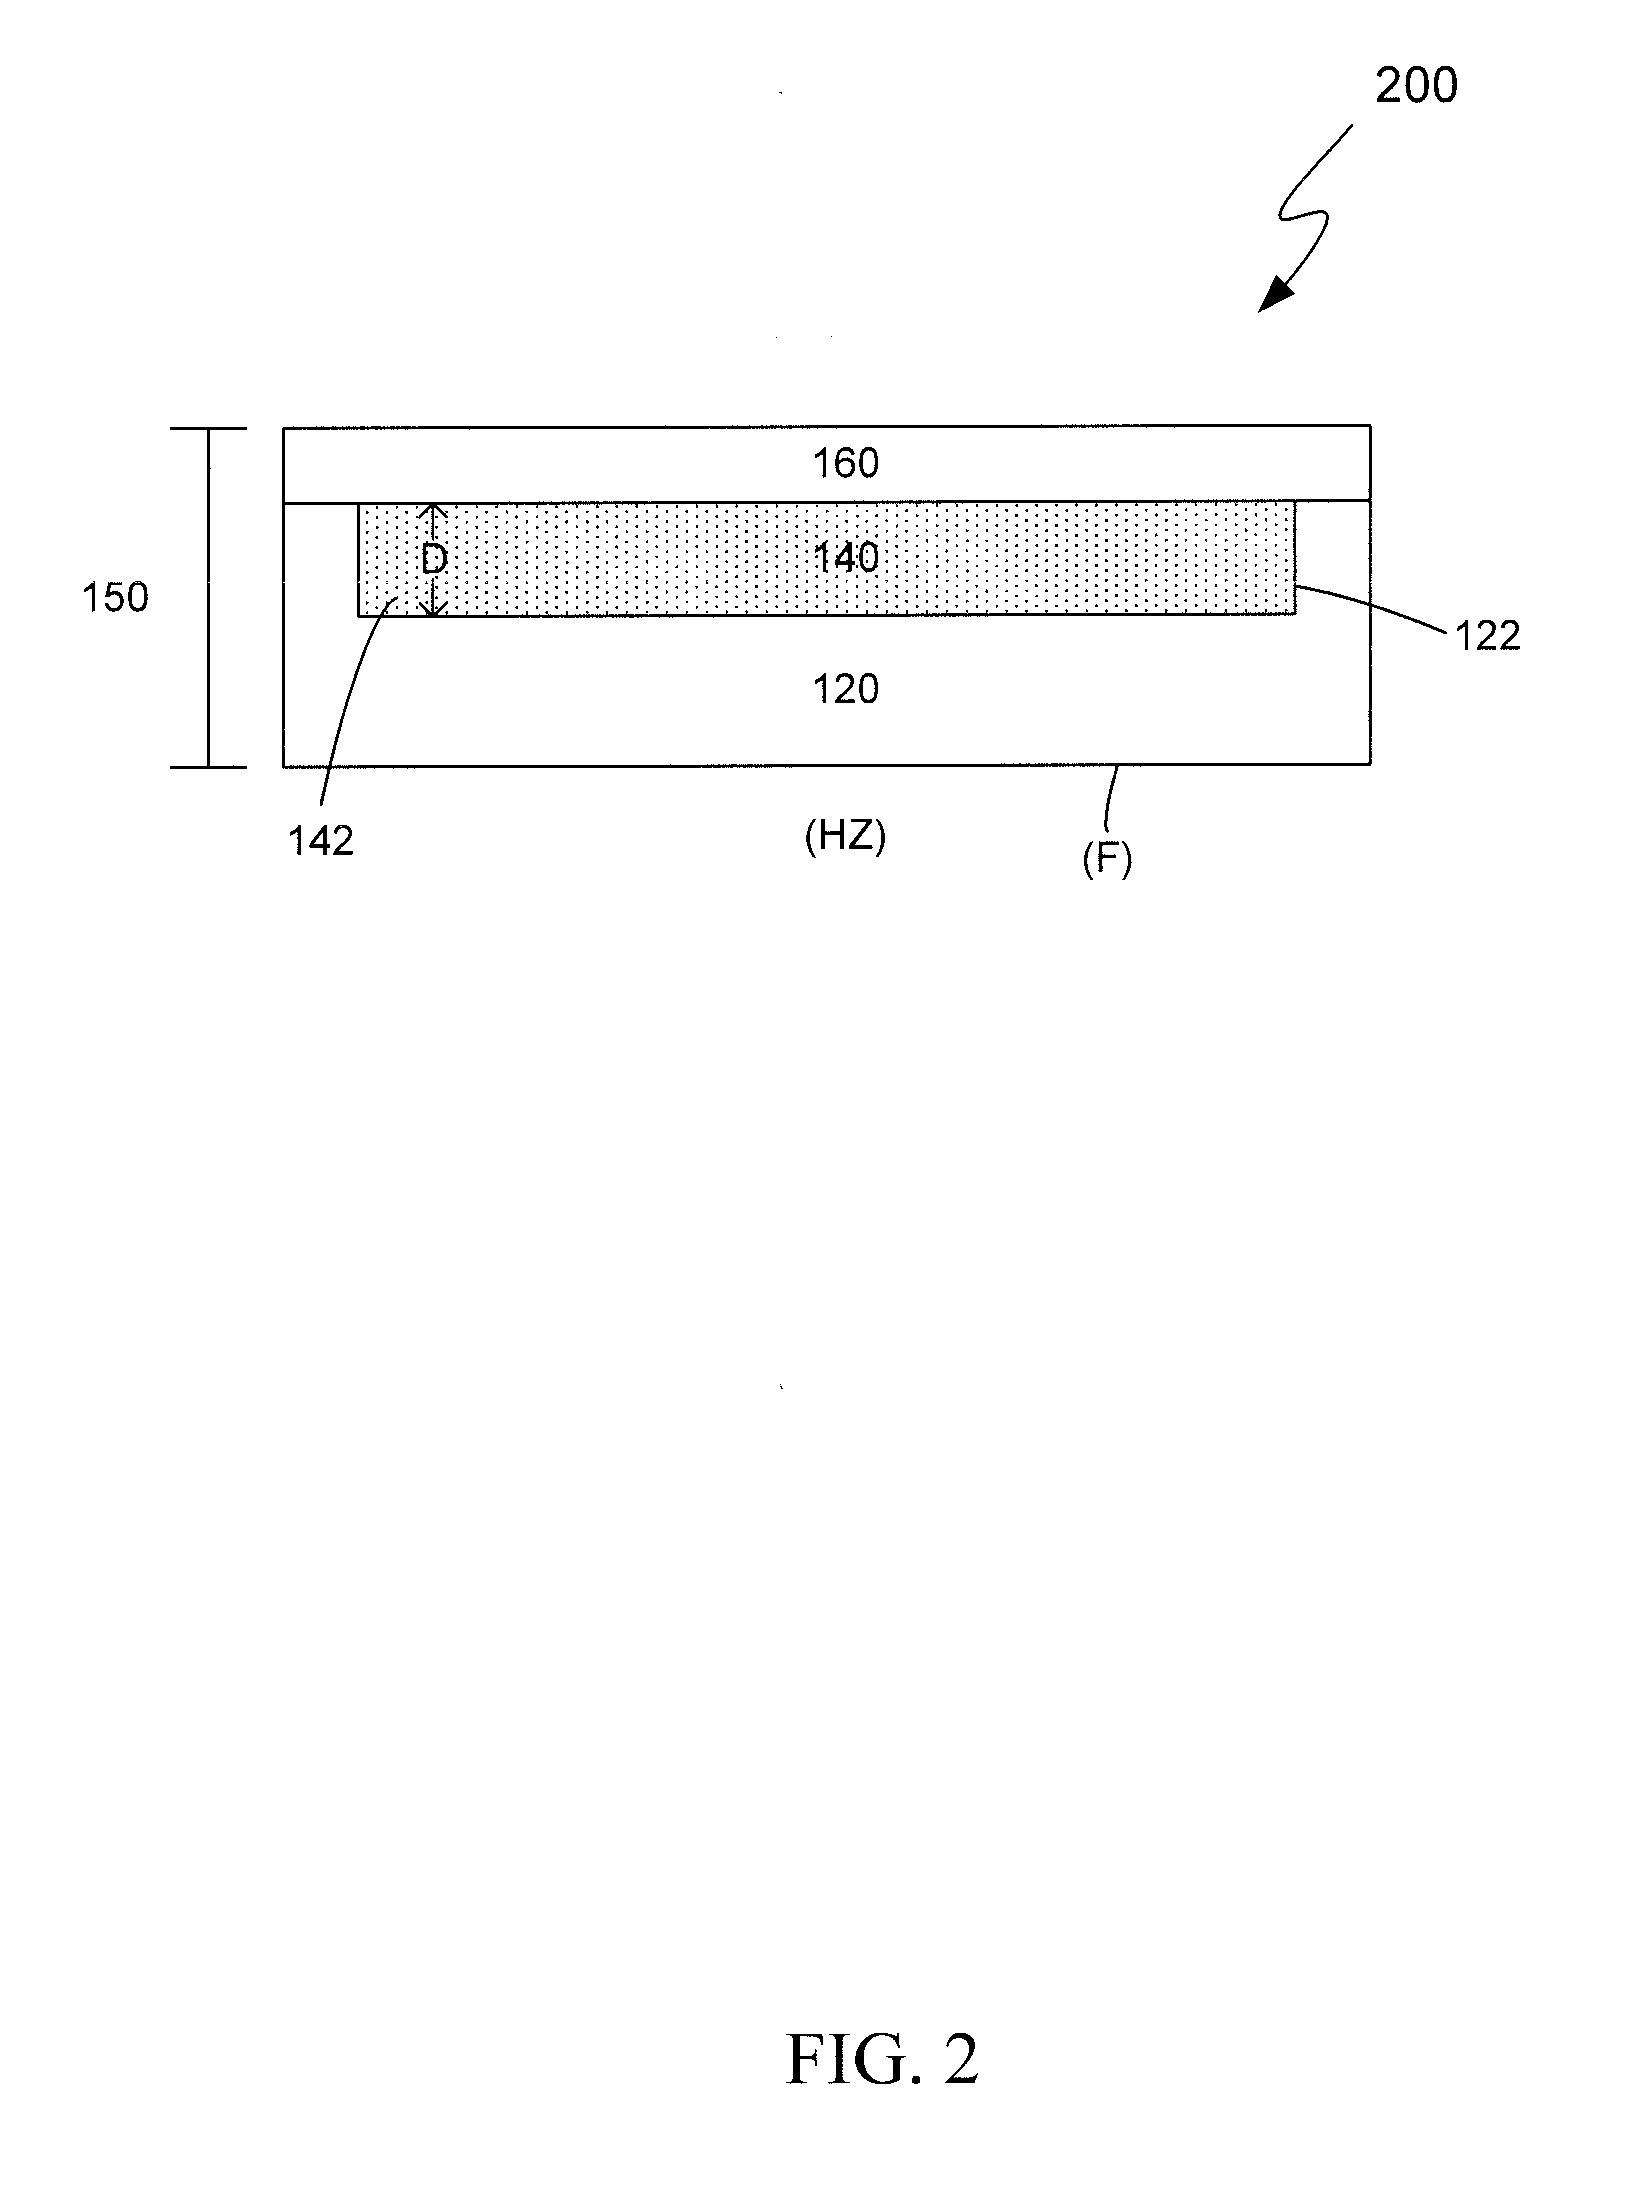 Fire resistant systems, methods and apparatus